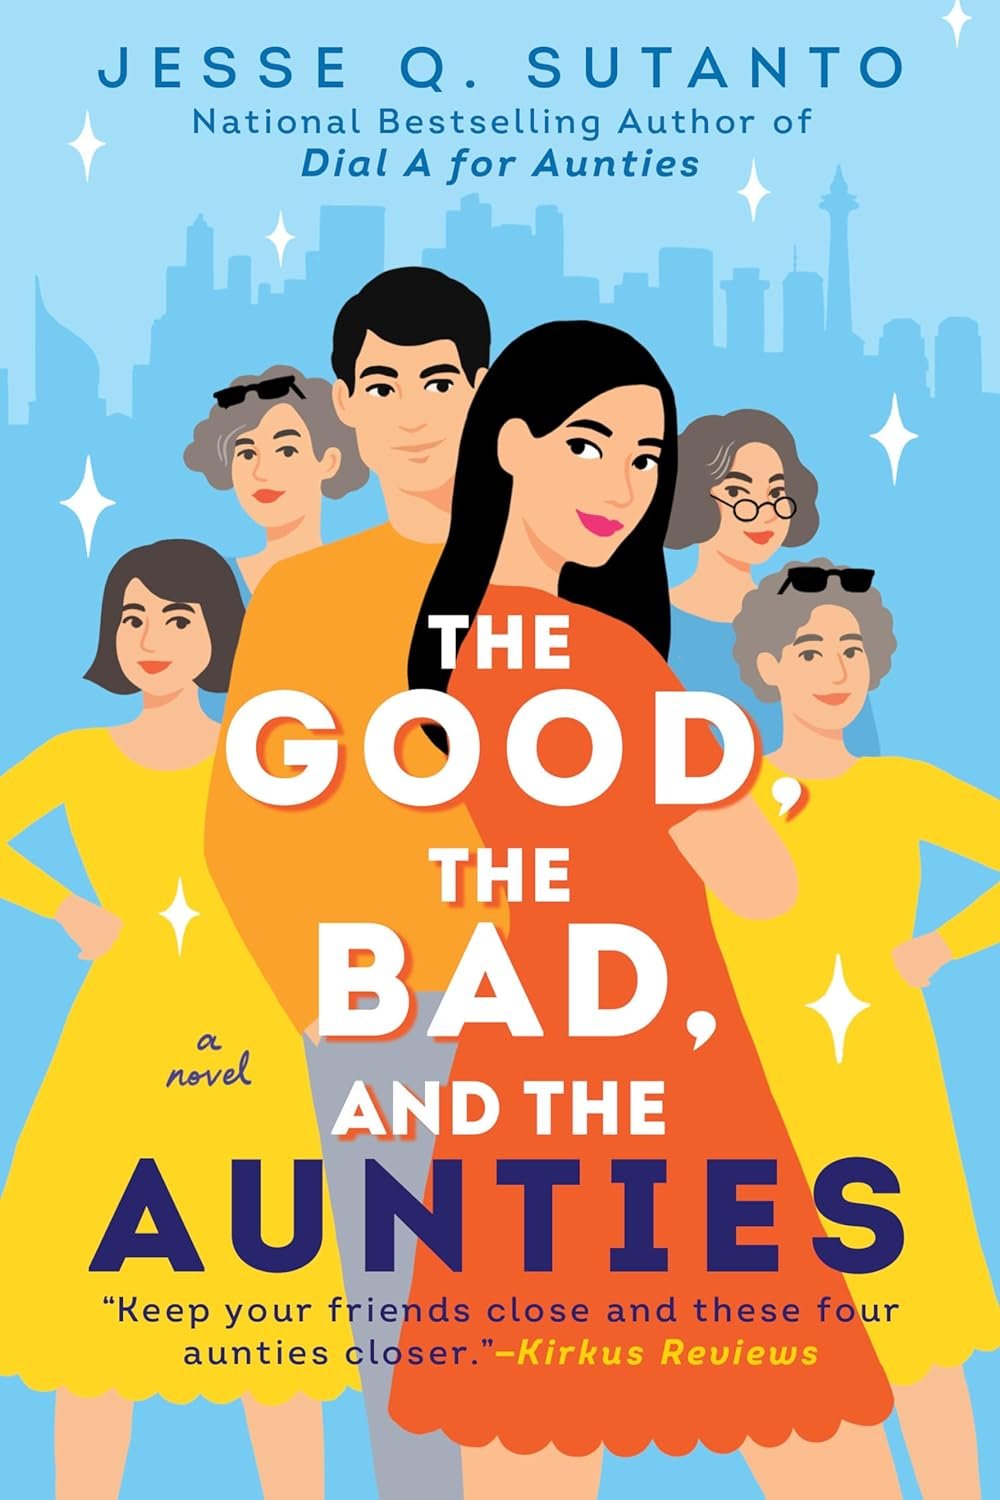 The Good, The Bad, and The Aunties by Jesse Q. Sutanto.jpg